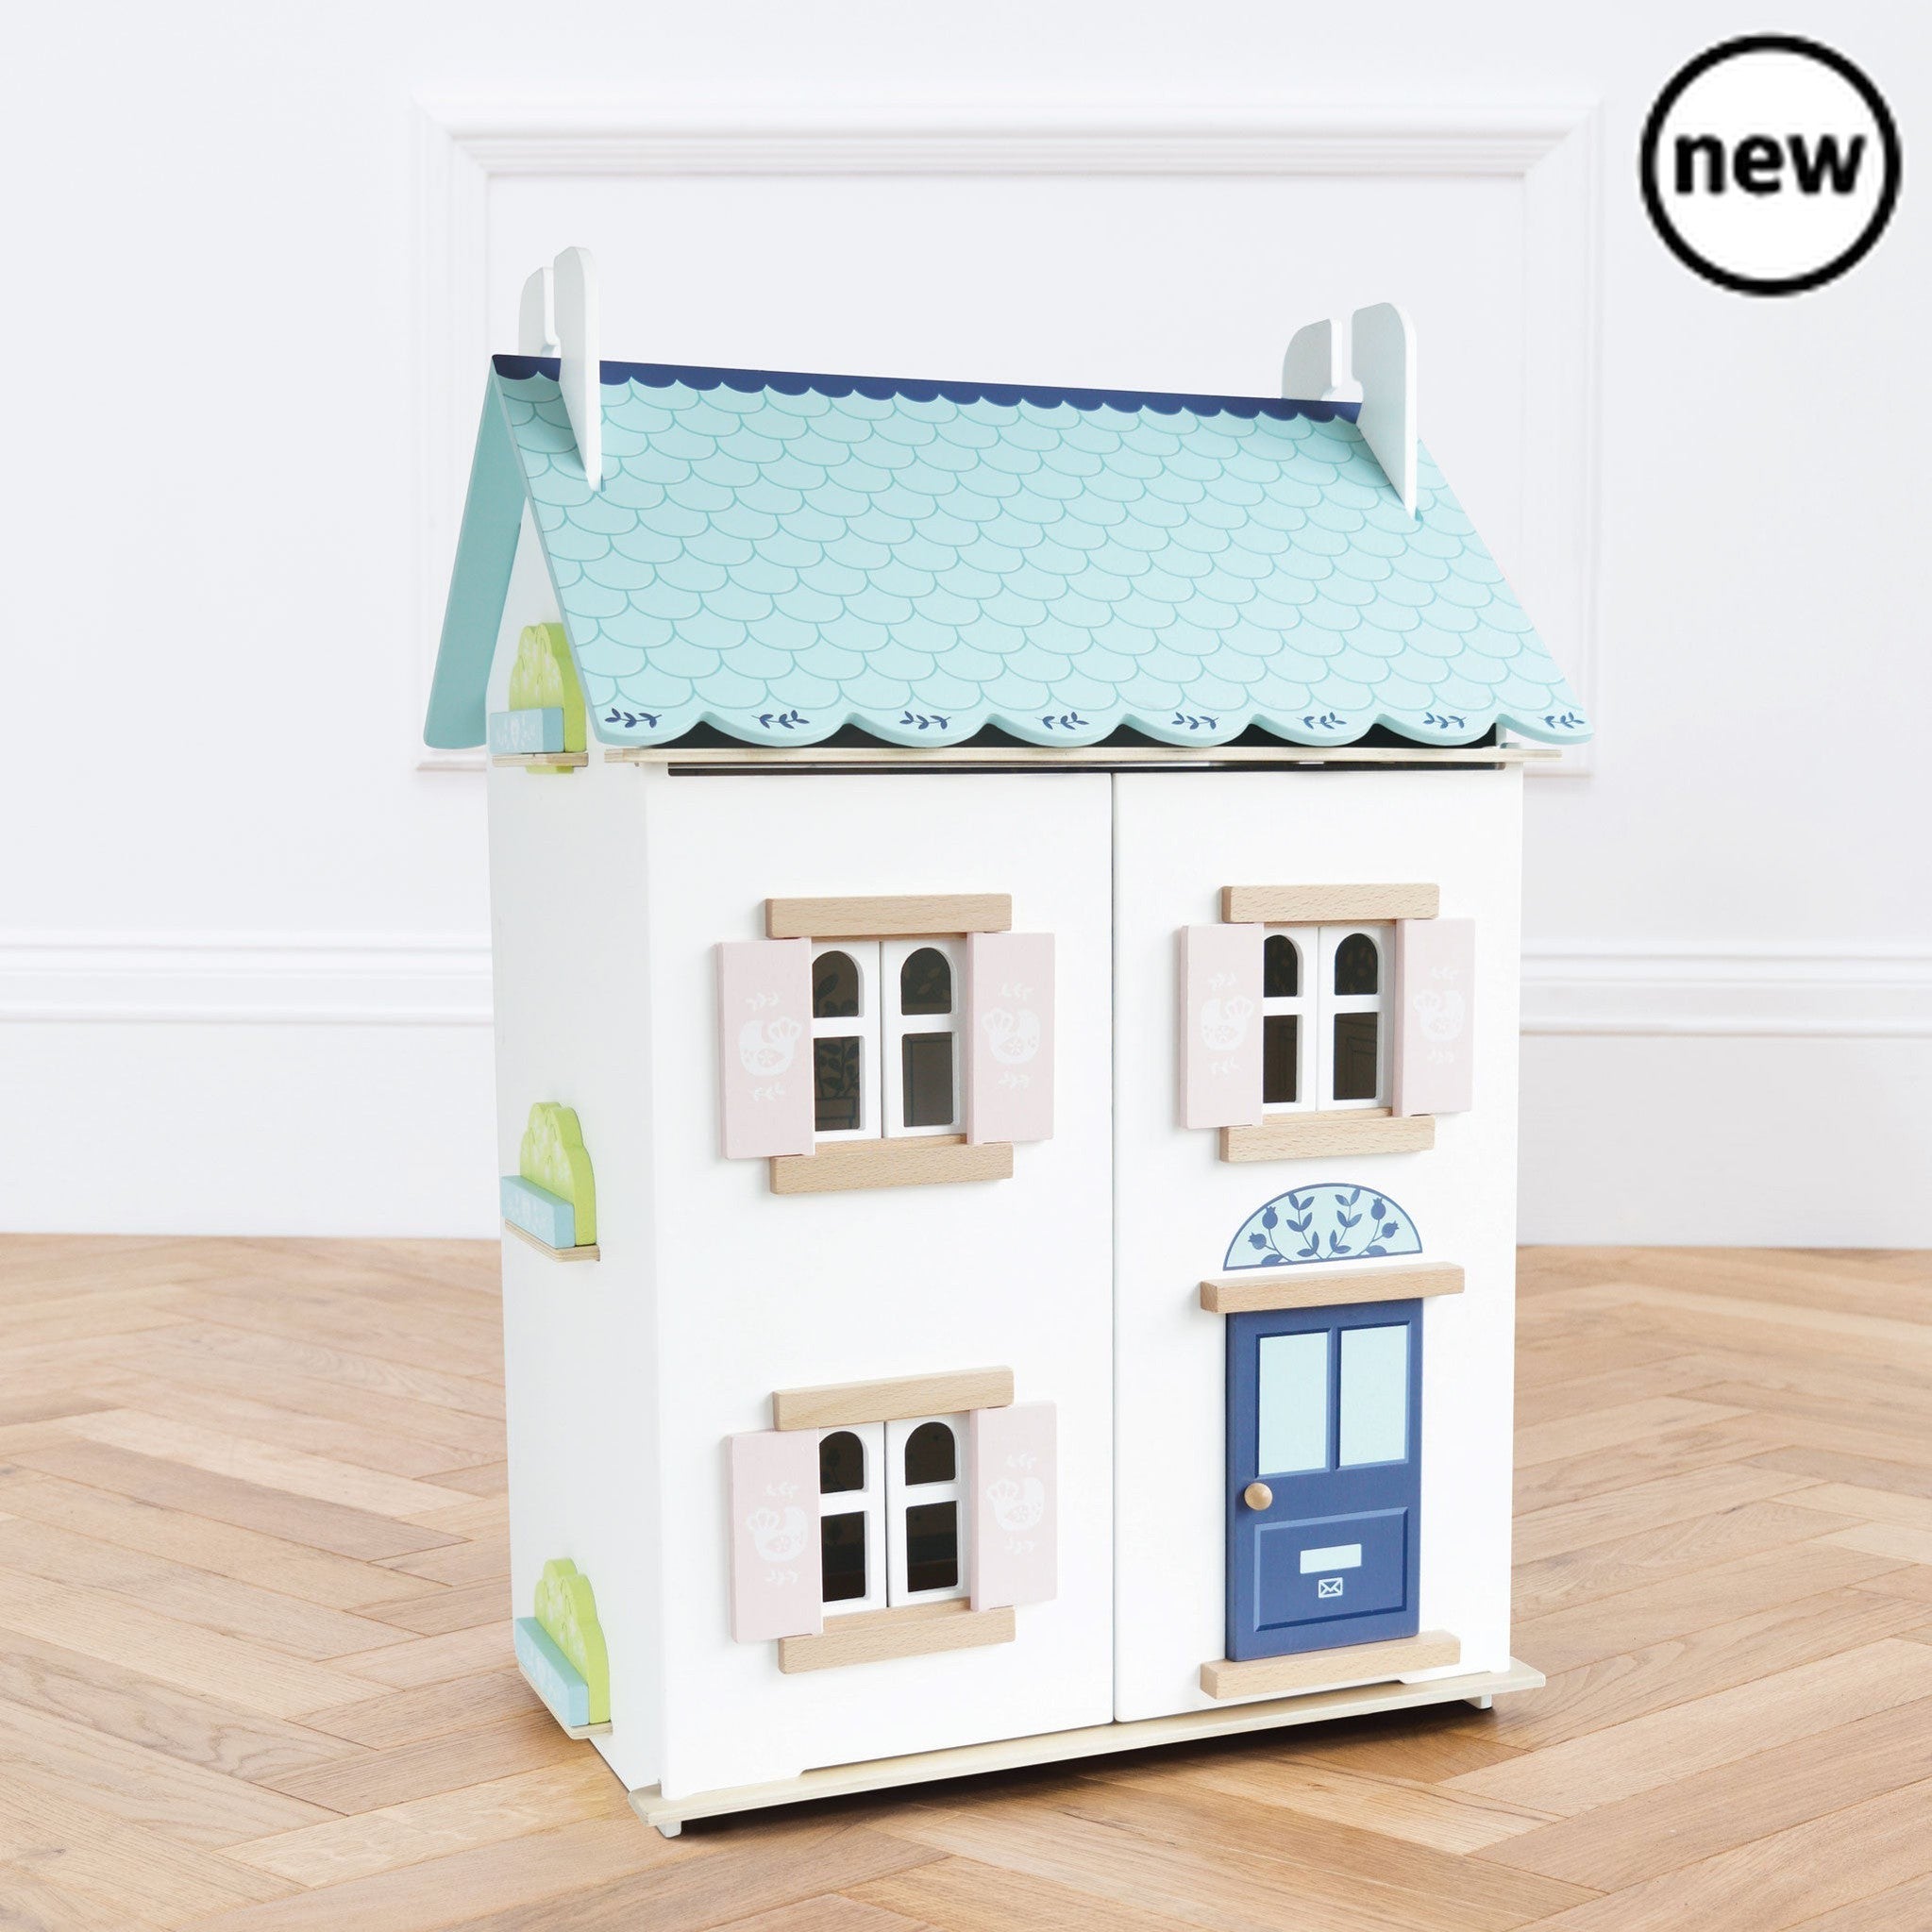 Blue Belle House, Description What a stunner! Welcome to Blue Belle Cottage. This beautiful dolls house is sure to be an instant favourite. Fully painted and decorated in the prettiest pastel shades, using soft blues, pinks and white, this delightful toy house is set across three storeys and is just waiting to be discovered. A welcoming home for any new guests, little ones will adore the many exciting features. Open the front to reveal a wonderful world of make believe. With wooden opening windows and shutt